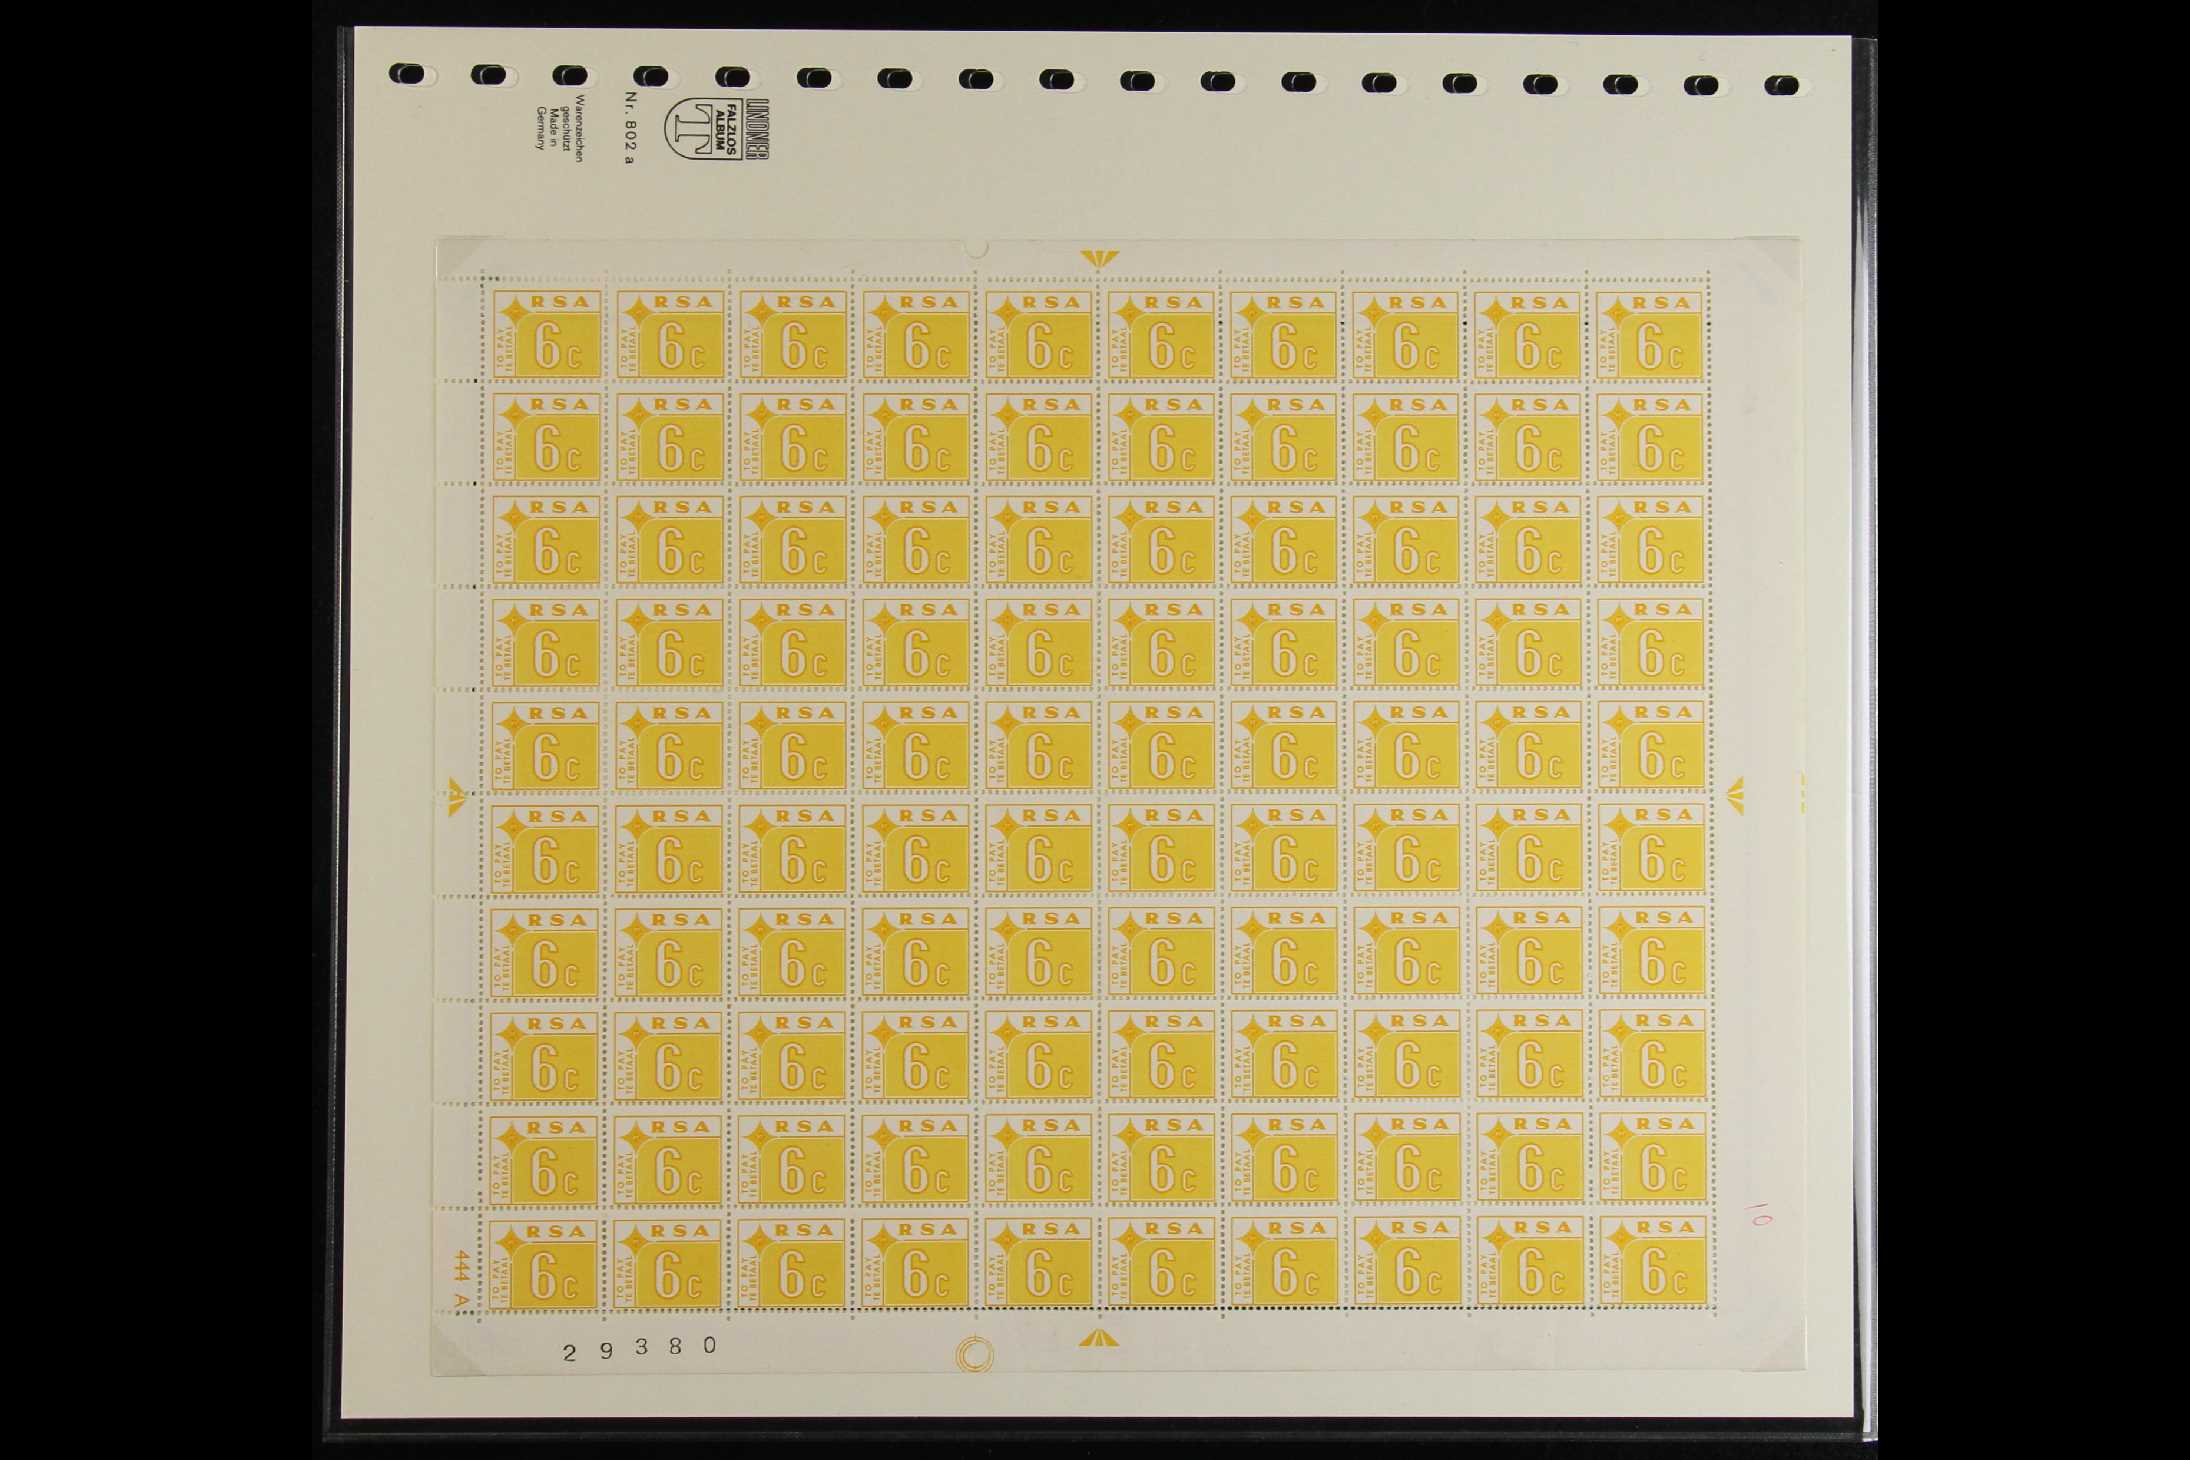 SOUTH AFRICA POSTAGE DUES 1972 complete set, SG D75/80, complete sheet 100 never hinged mint, - Image 4 of 7